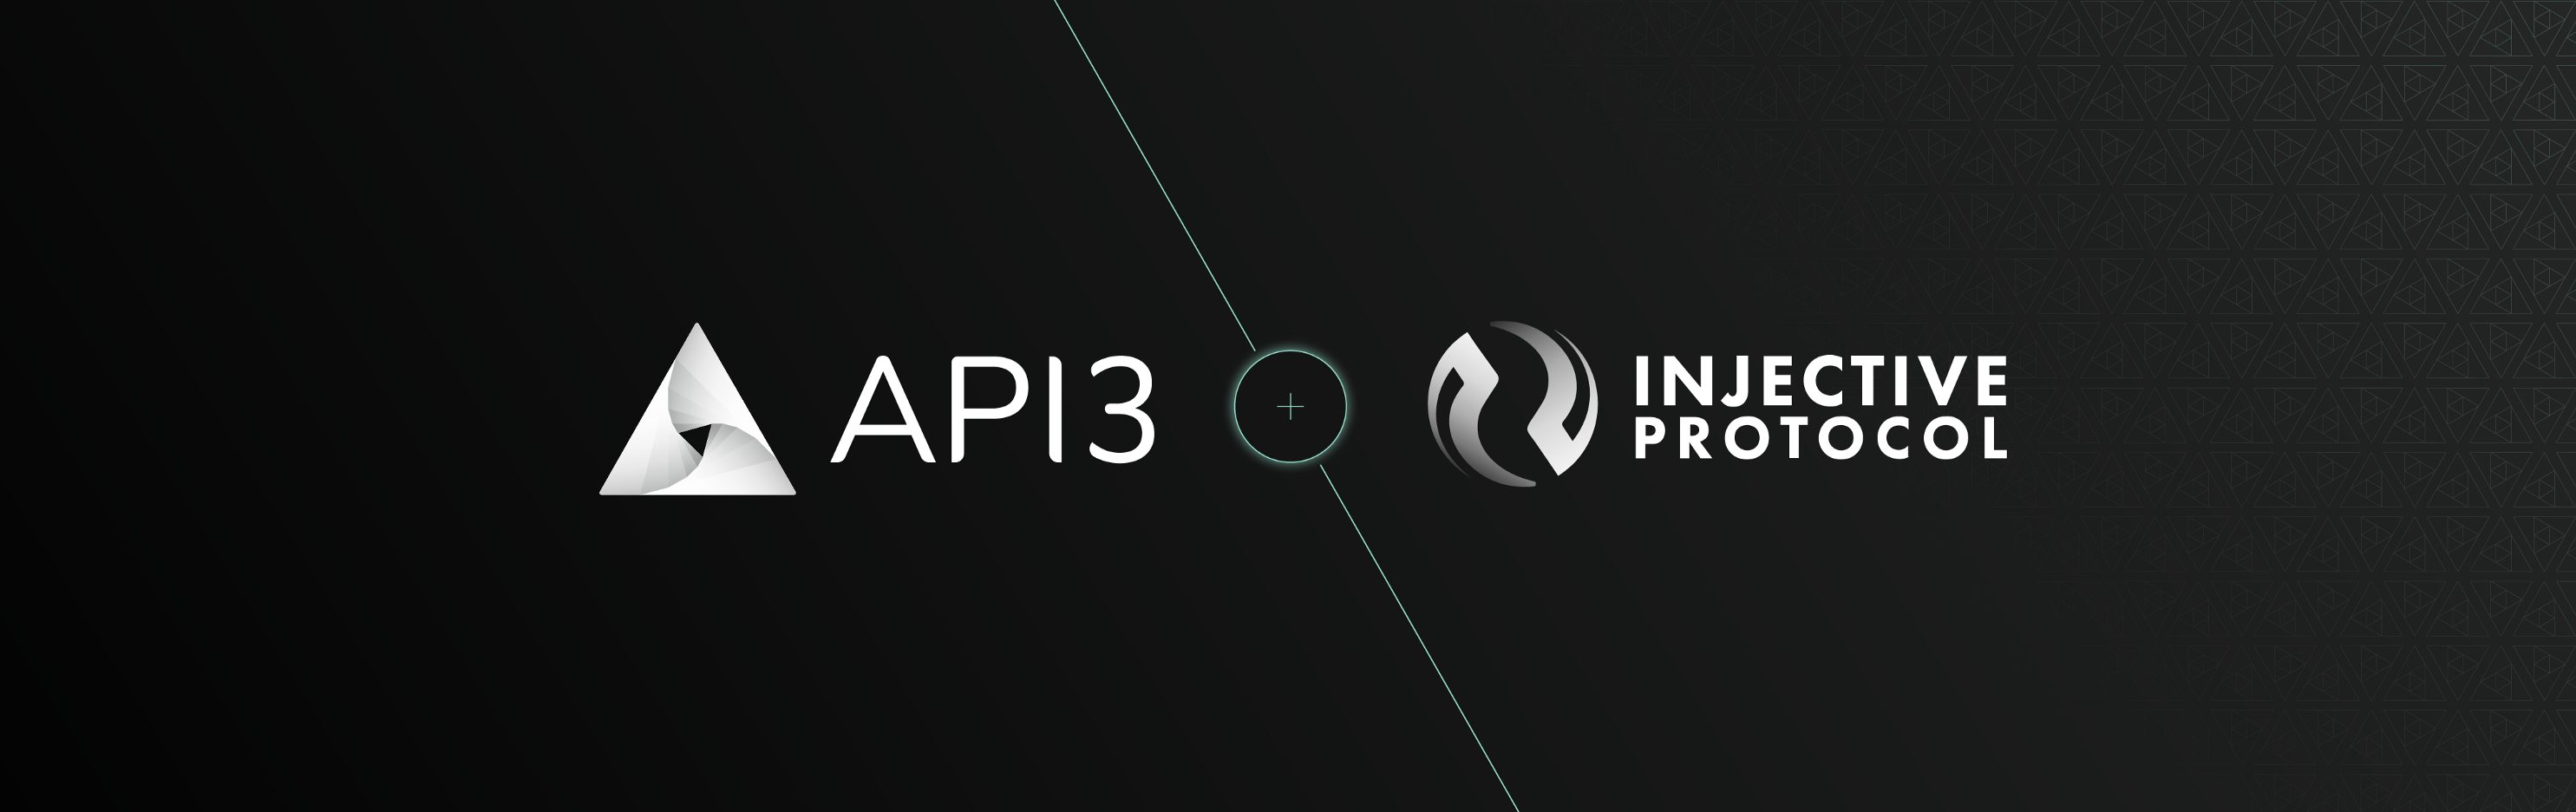 API3DAO Announces new partnership with Injective Protocol ...